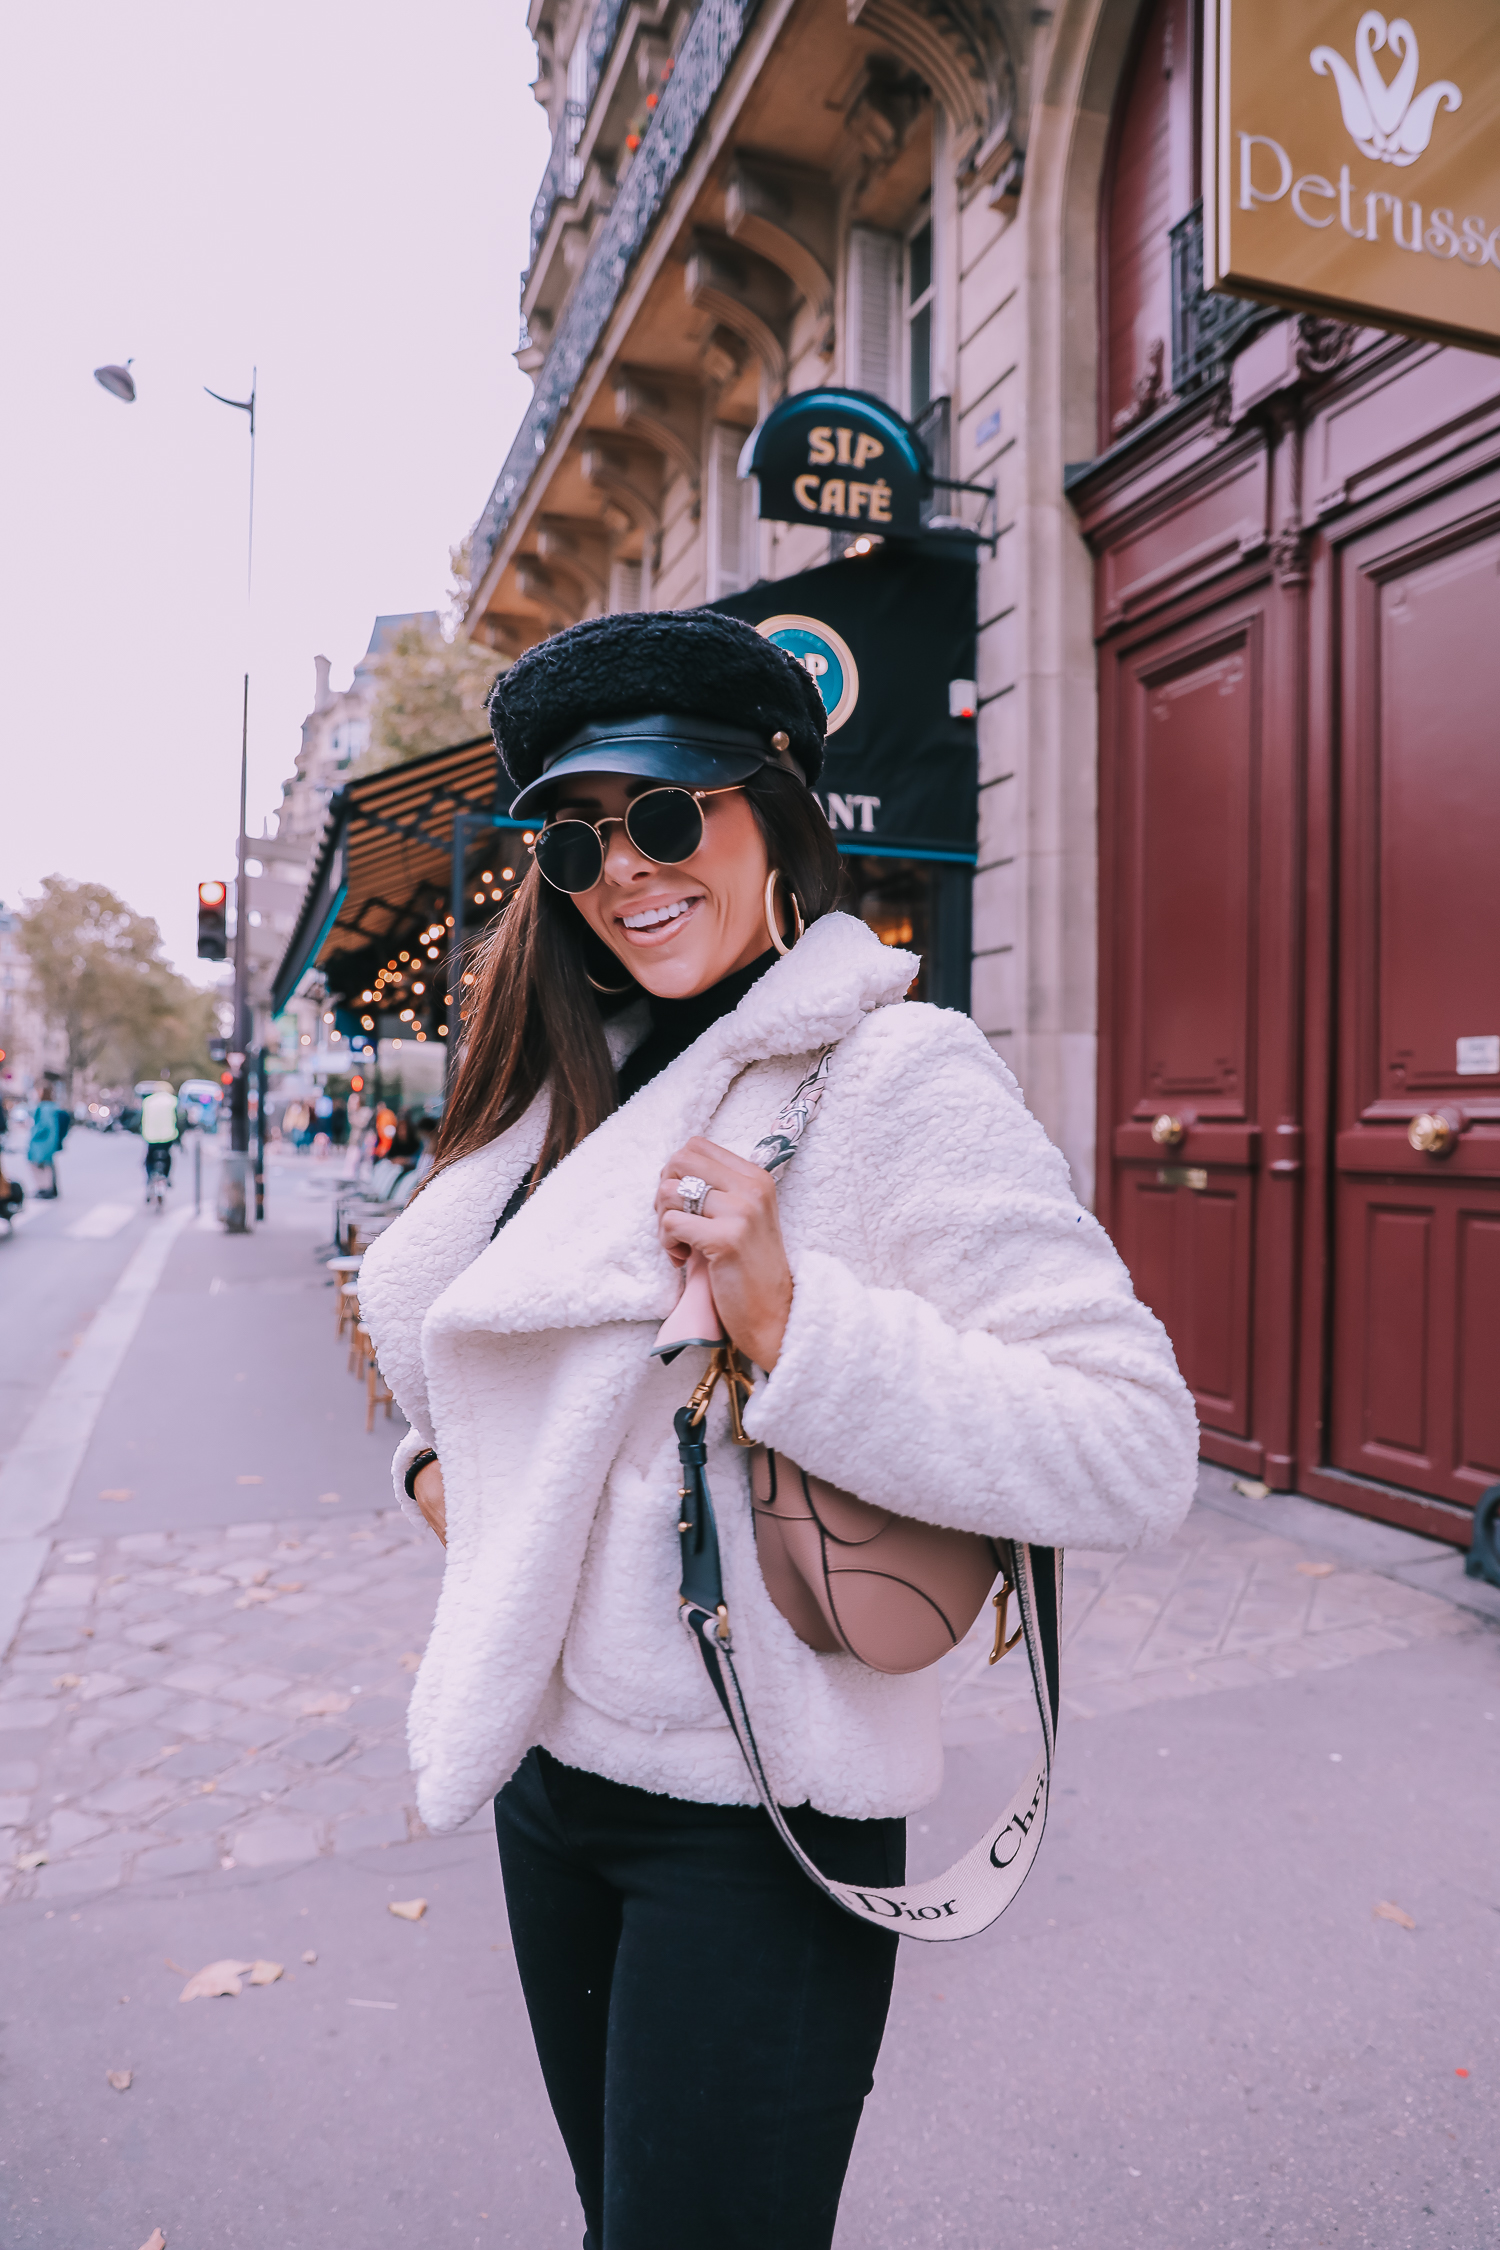 Ivory Peacoat styled by top US fashion blog, The Sweetest Thing: image of a woman wearing a BB Dakota ivory peacoat in Paris. | fall outfit ideas pinterest 2019, paris fall outfit ideas, dior saddle bag nude with straps, dior saddle bag blush saddle bag, emily ann gemma-2